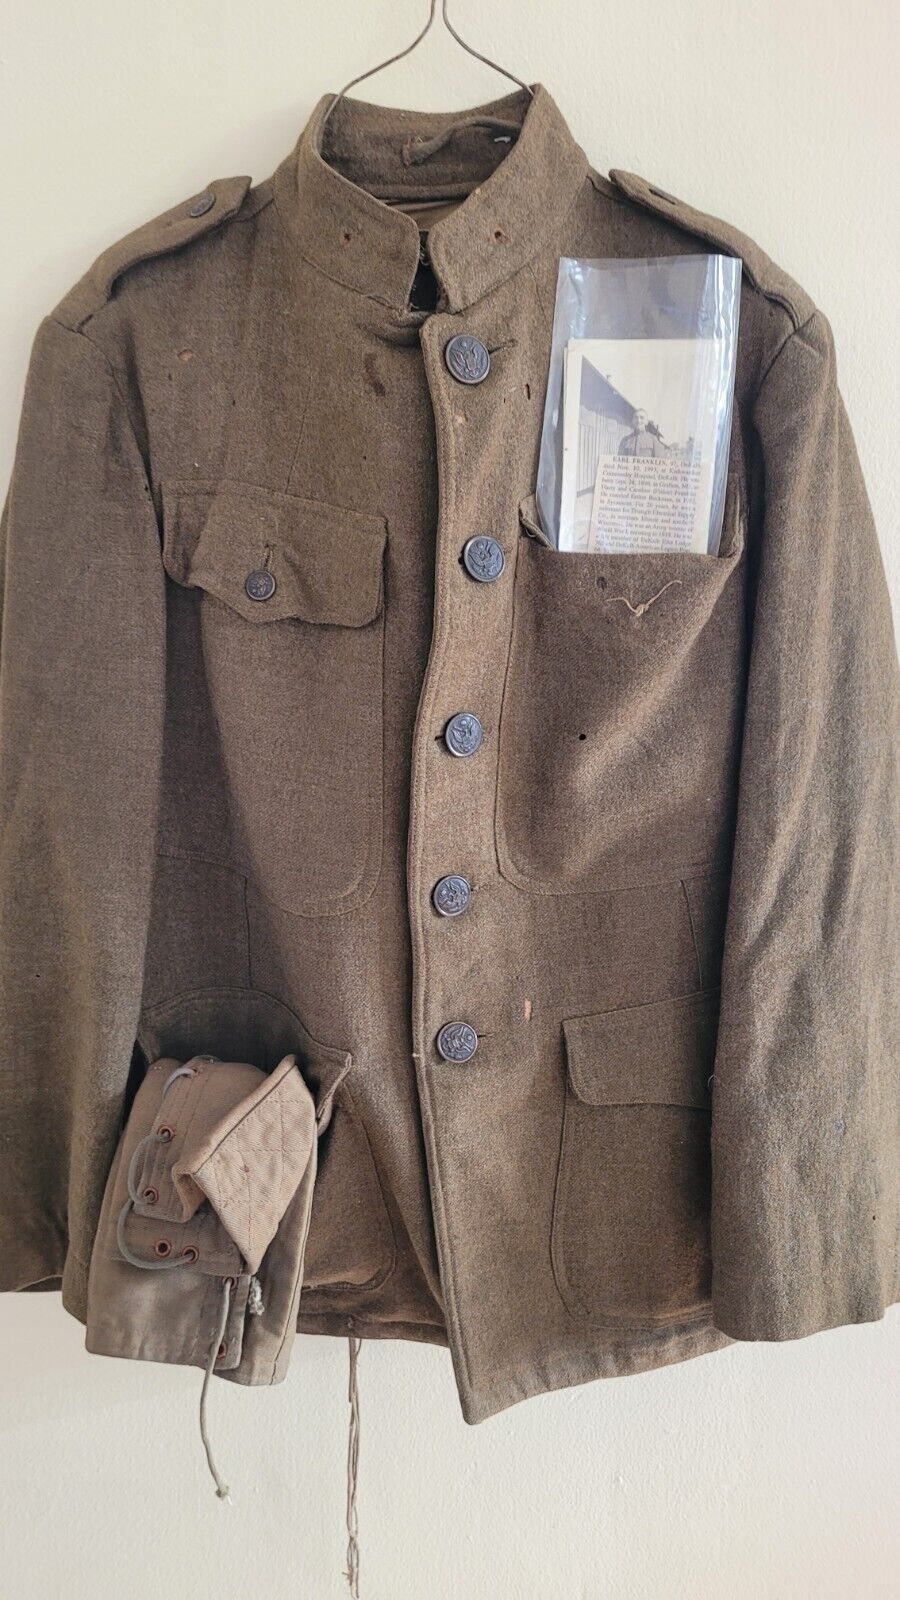 Authentic WWI U.S. Army Winter Wool Jacket & Photos Providence Earl Franklin 